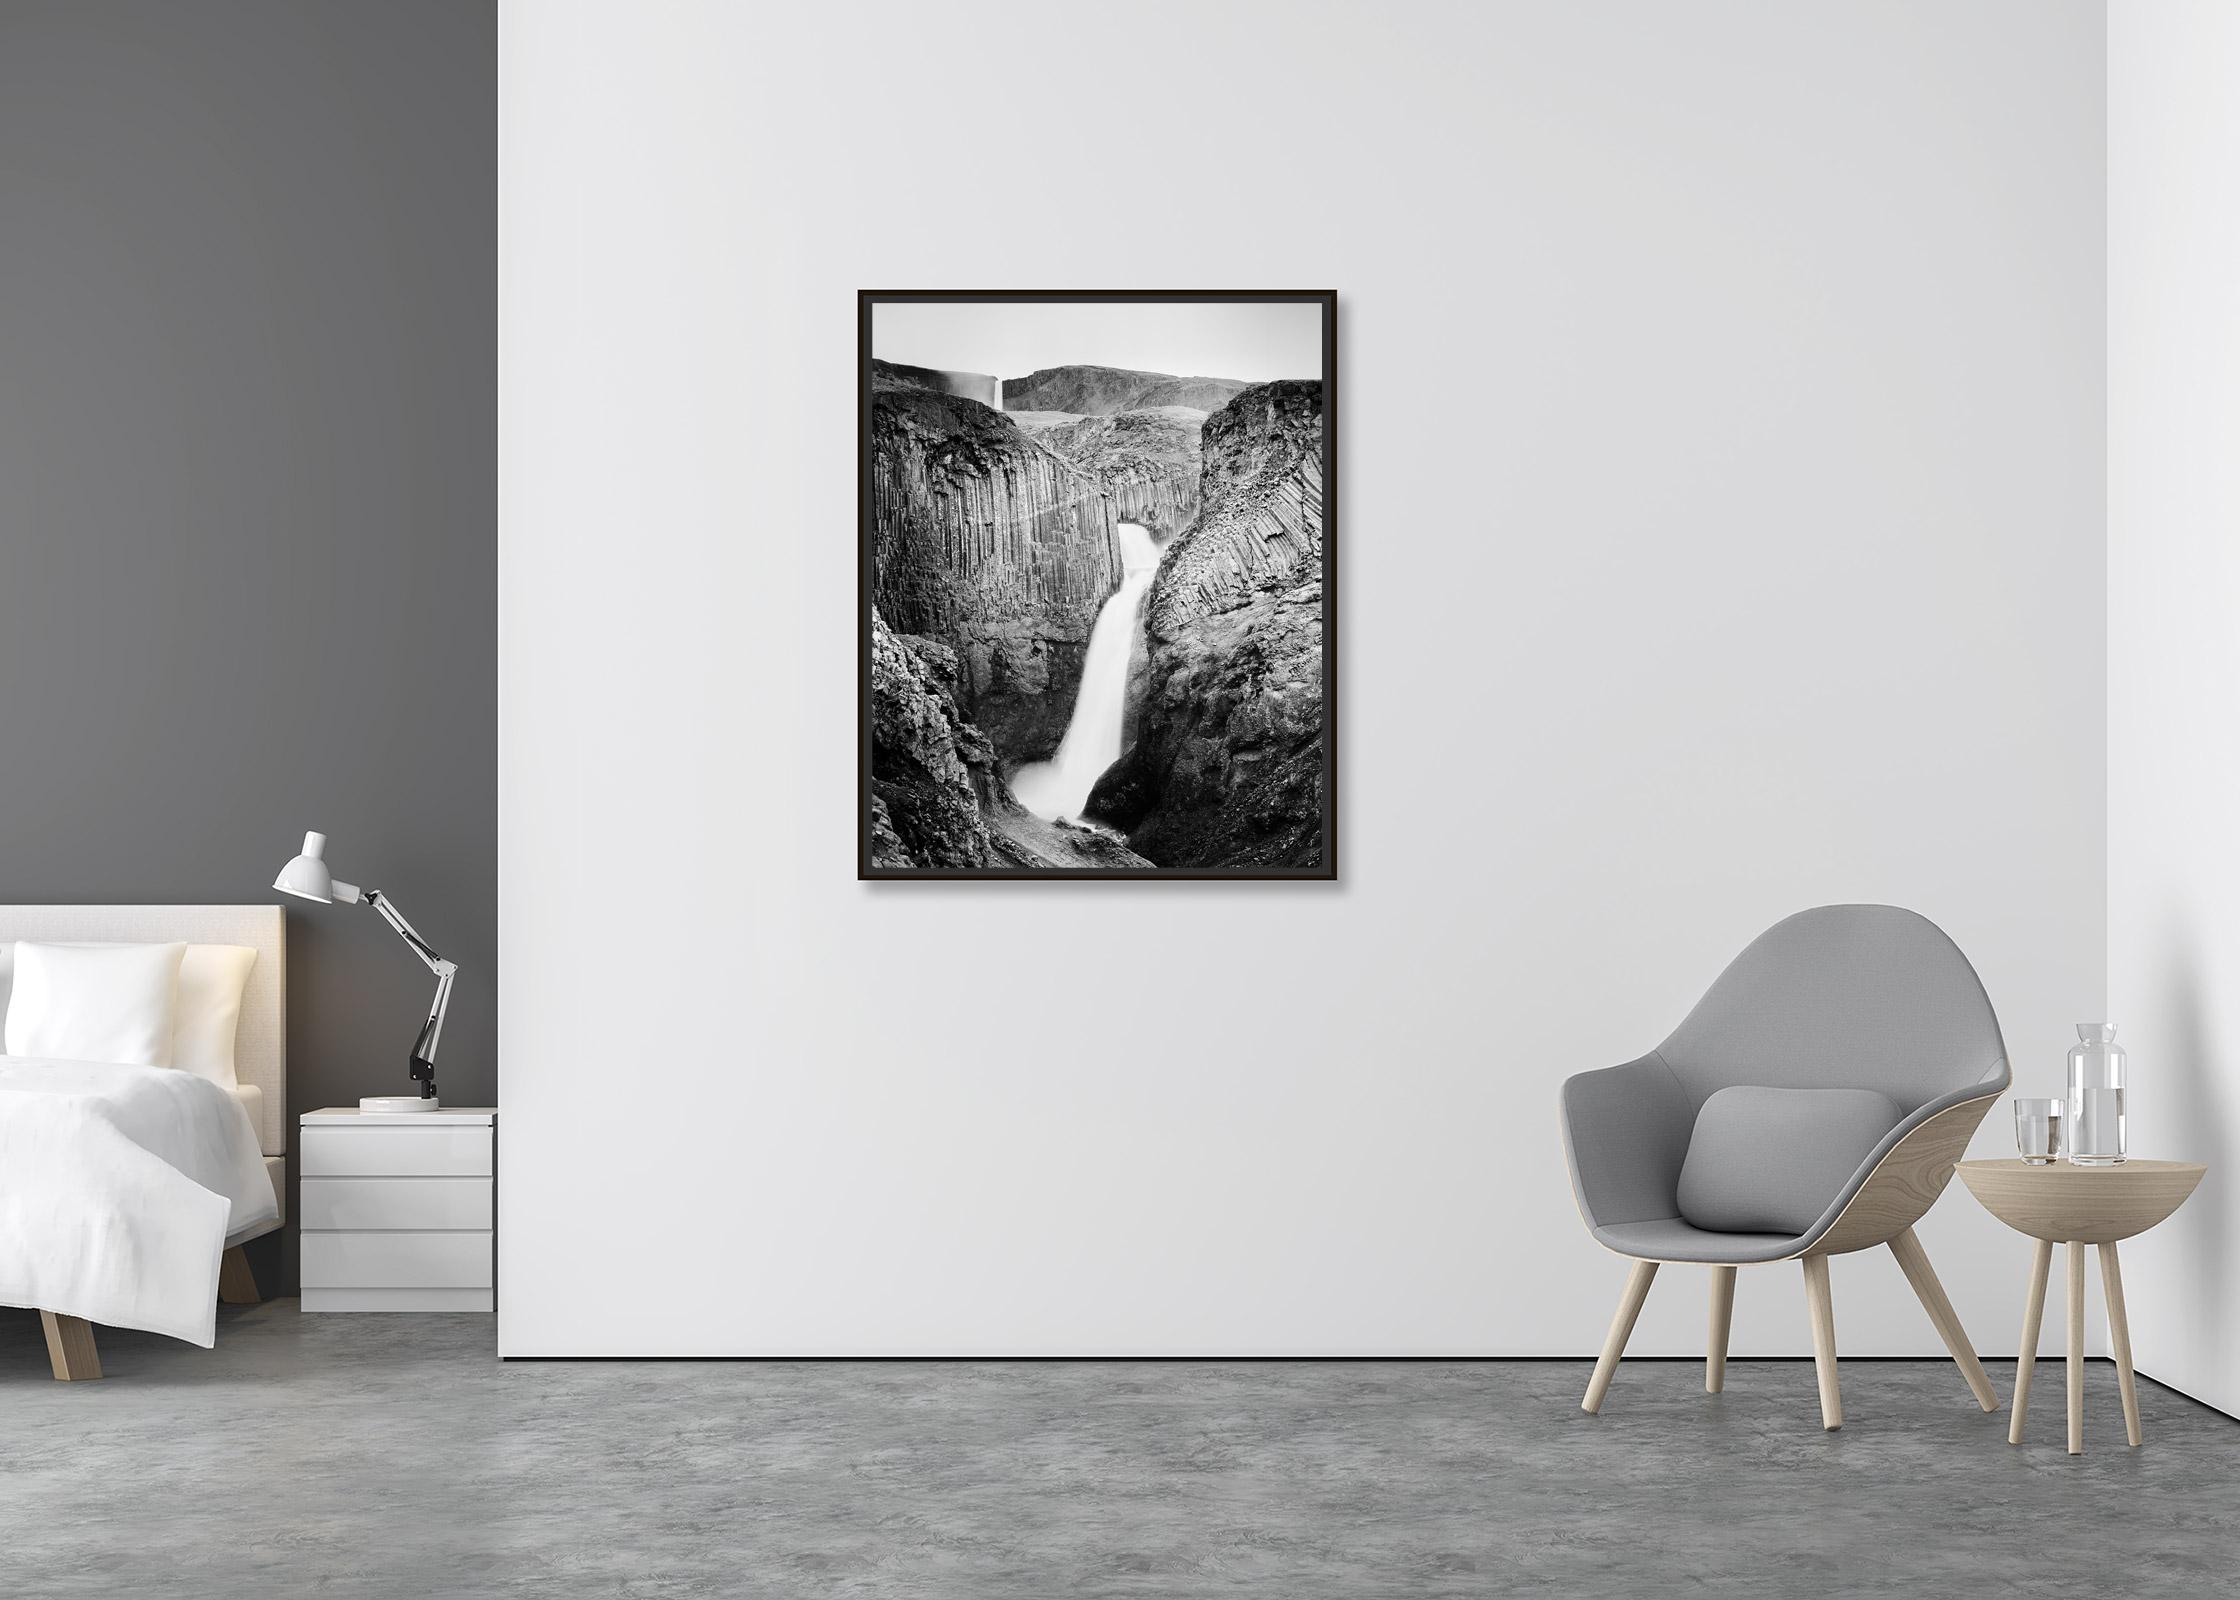 Hengifoss, Waterfall, Iceland, black and white fine art landscape photography - Contemporary Photograph by Gerald Berghammer